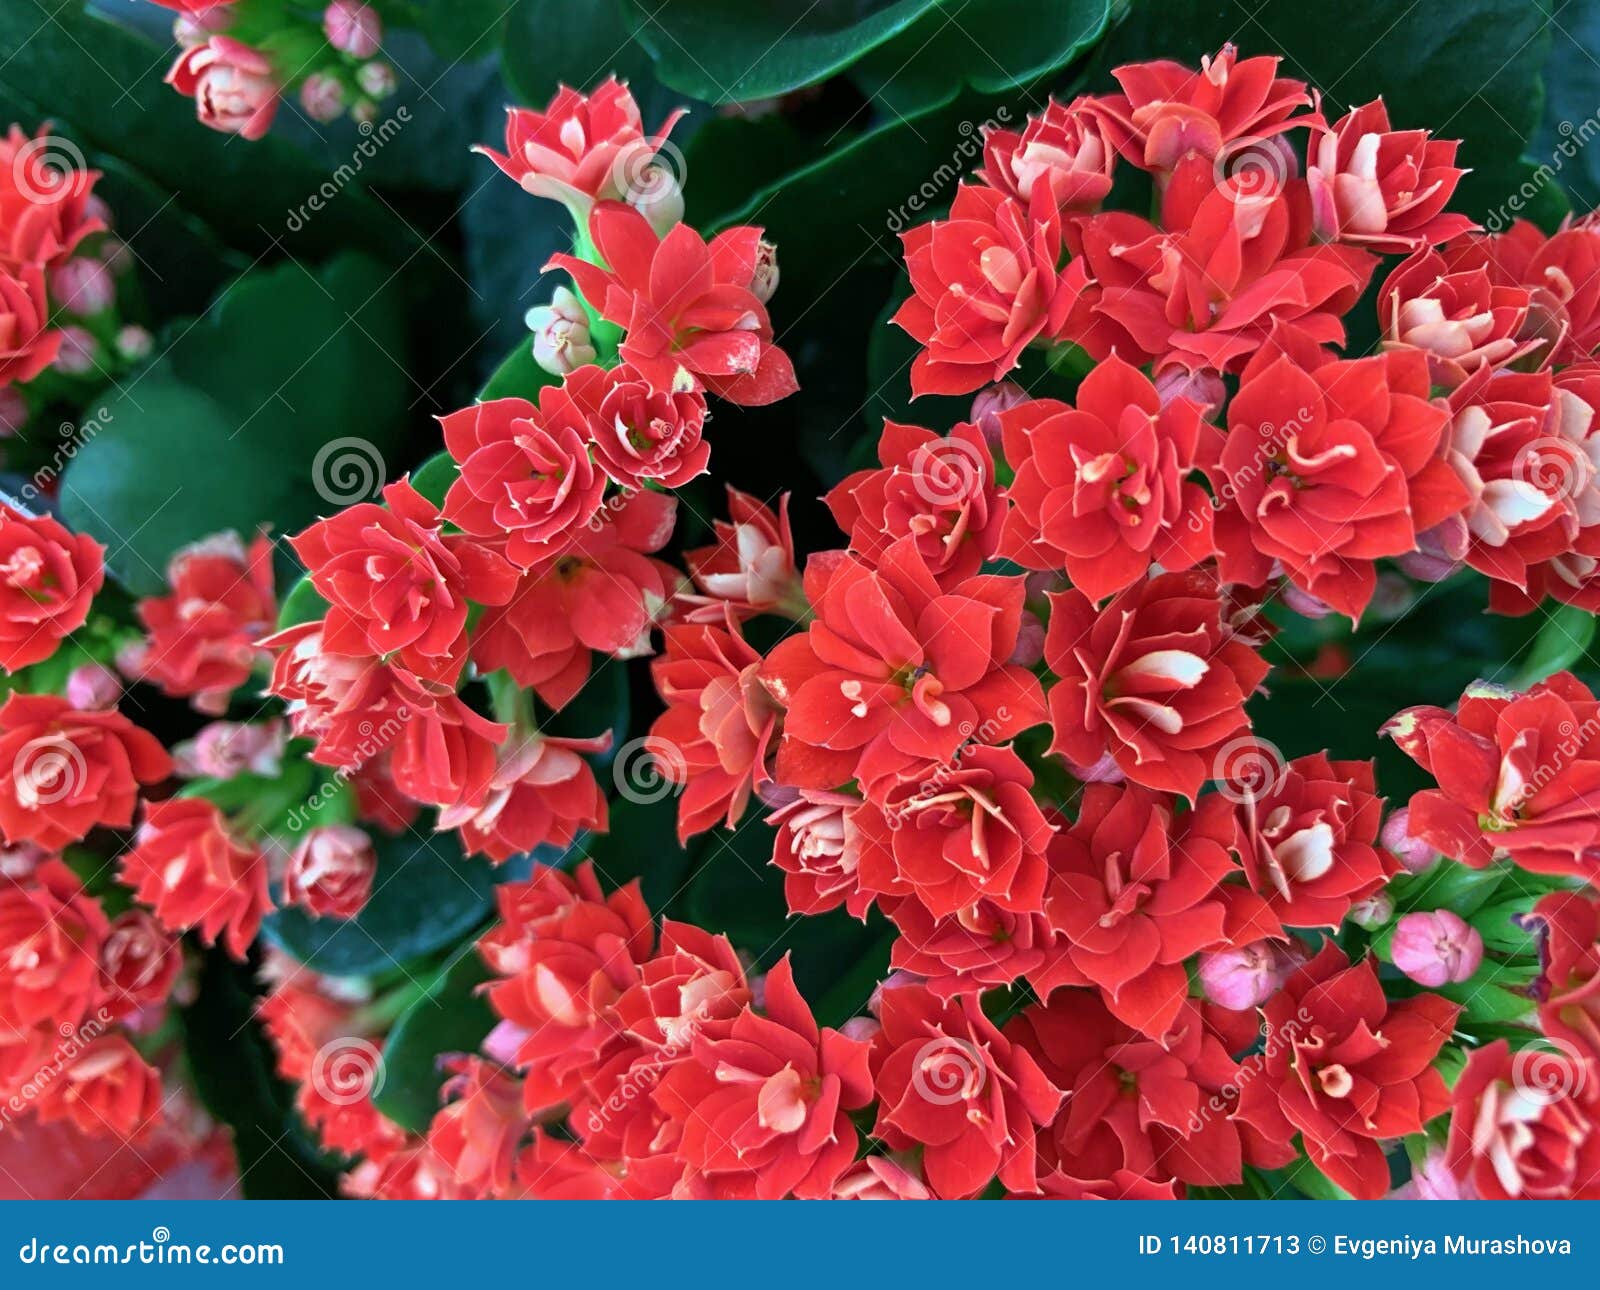 Pianta Fiori Rossi.Houseplant With Bright Red Flowers Kalanchoe Stock Image Image